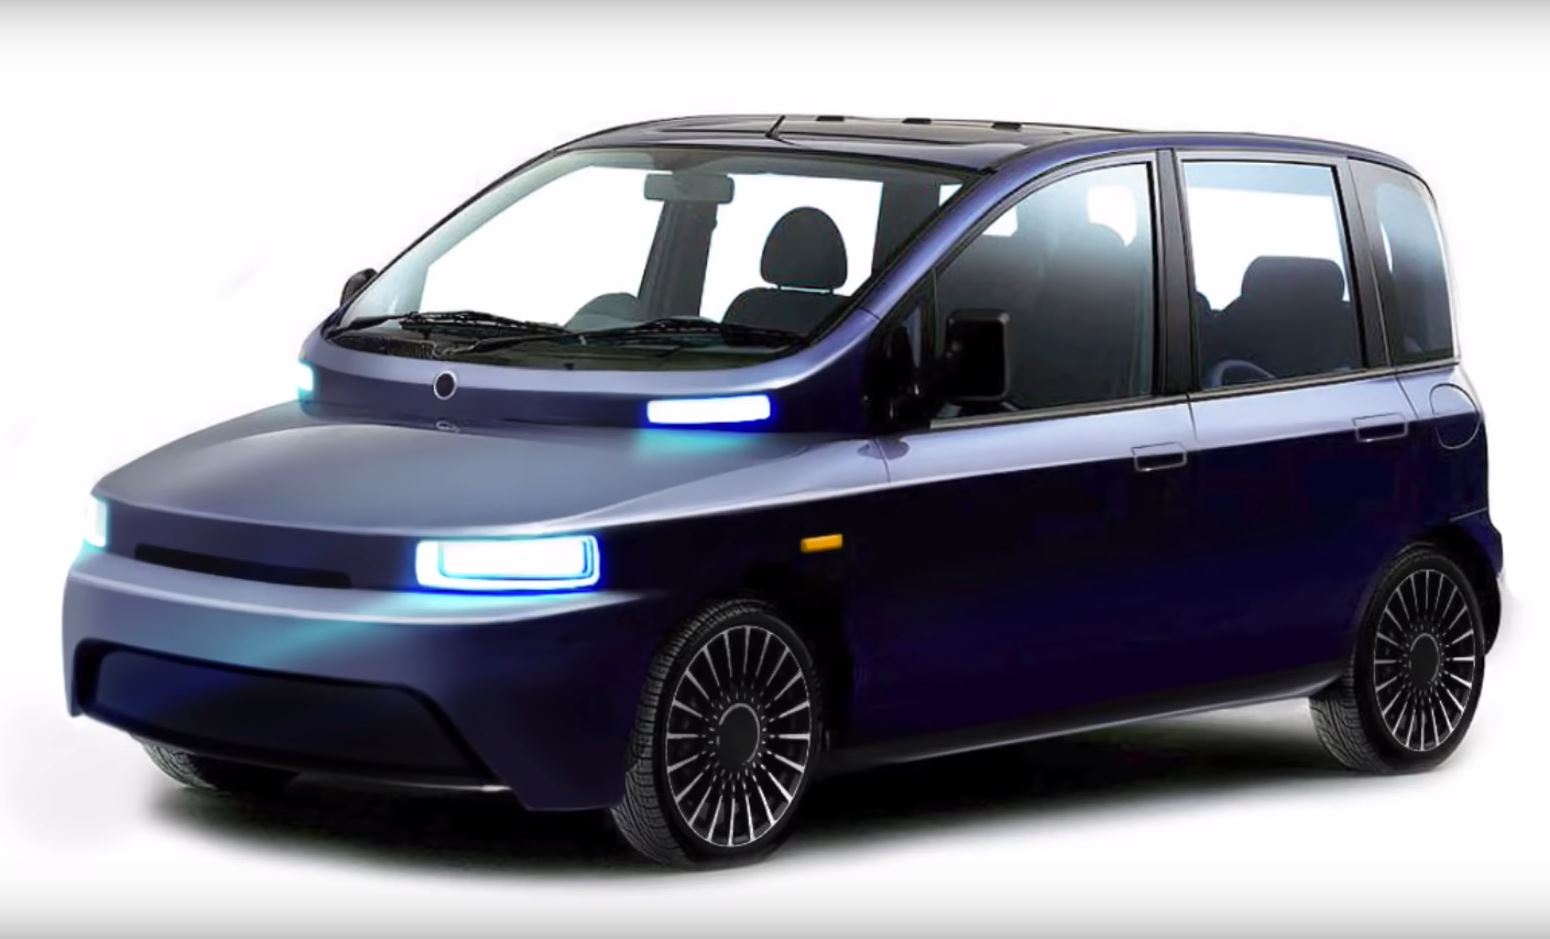 21 Fiat Multipla Redesign Looks Practical And Weird Autoevolution